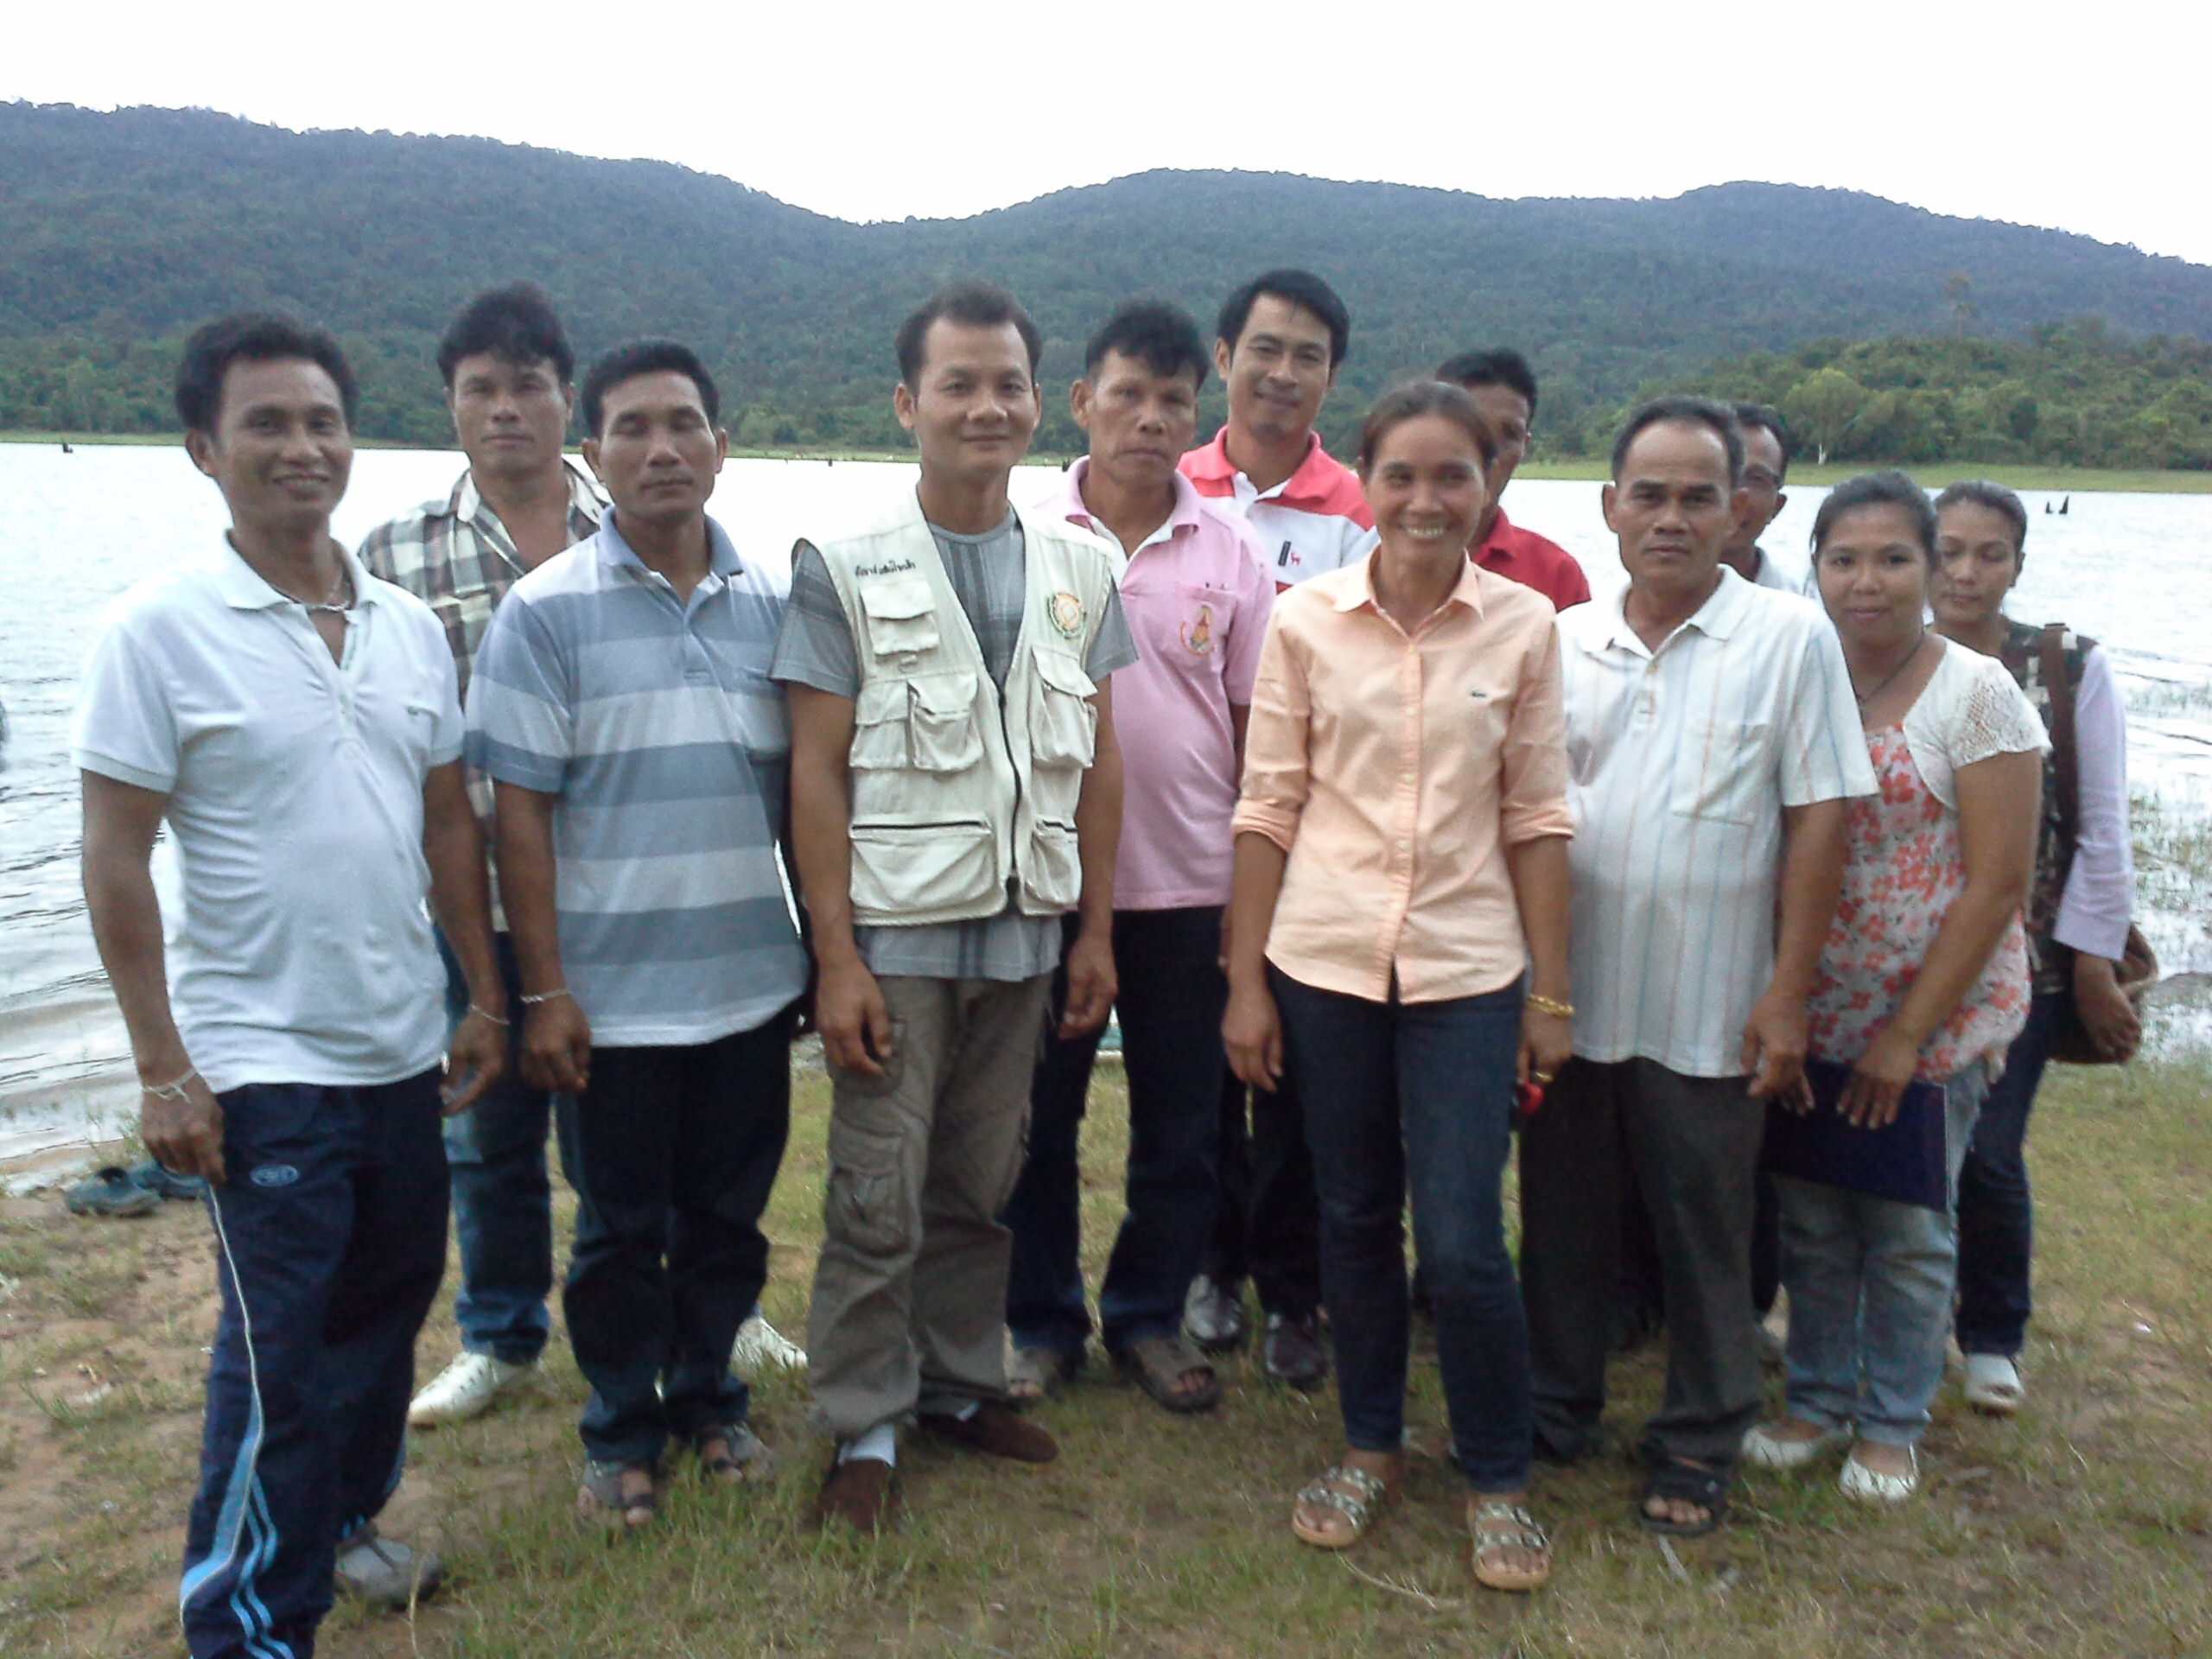 Community leaders of Ban Thakrabak show their willingness to collaborate with IUCN and Department of National Parks, Wildlife and Plant Conservation